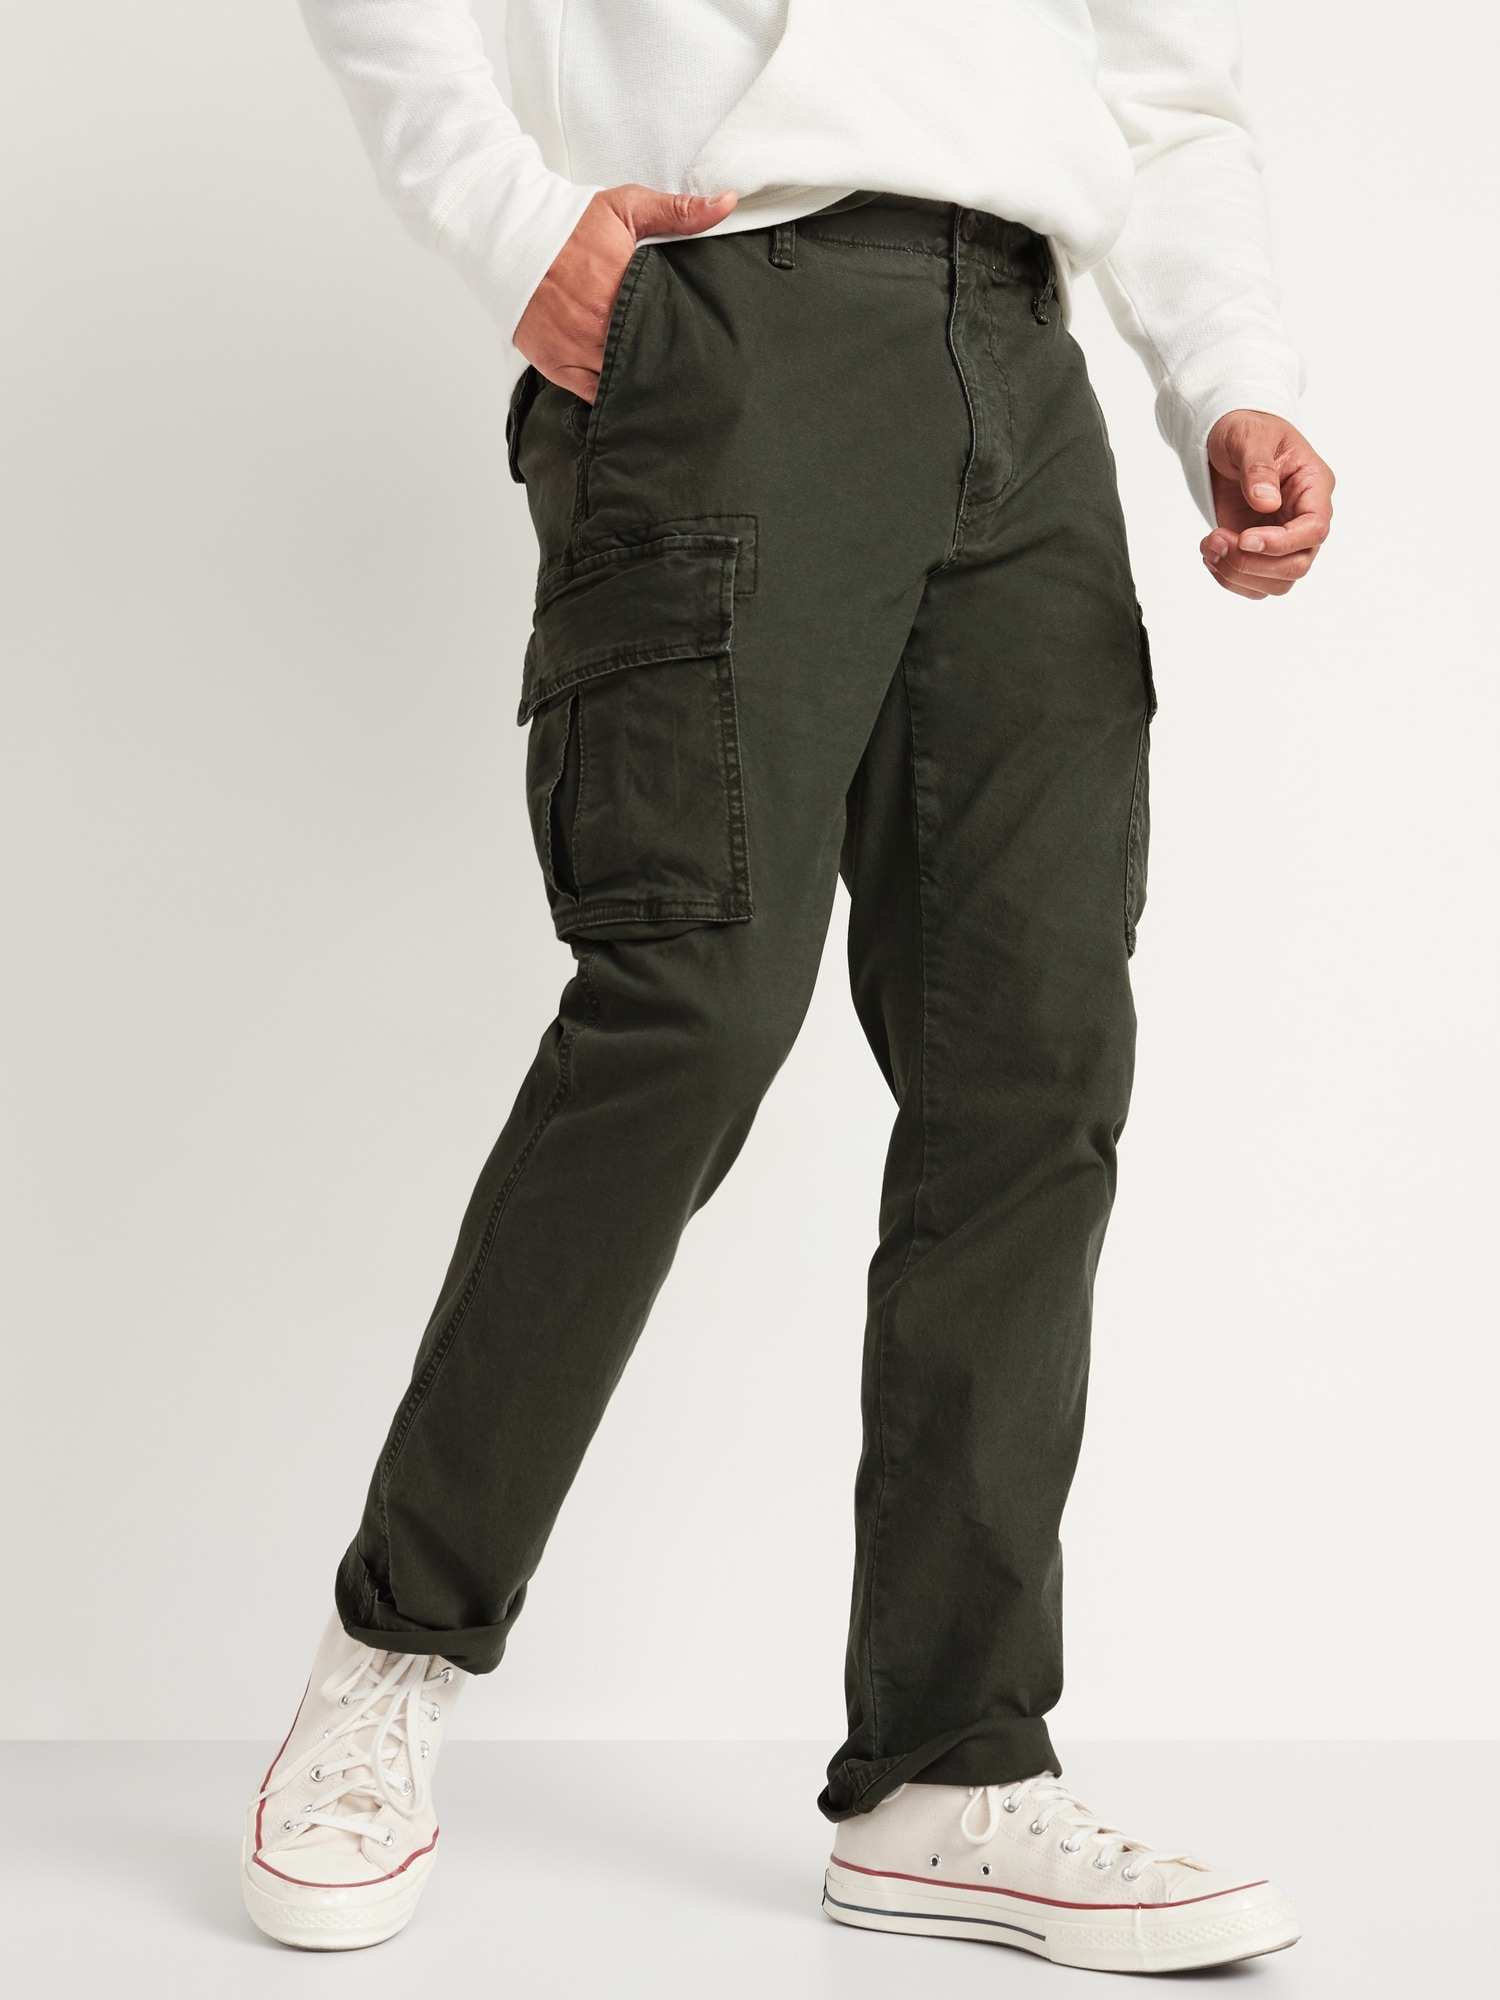 Straight Lived-In Built-In Flex Khaki Cargo Pants | Old Navy